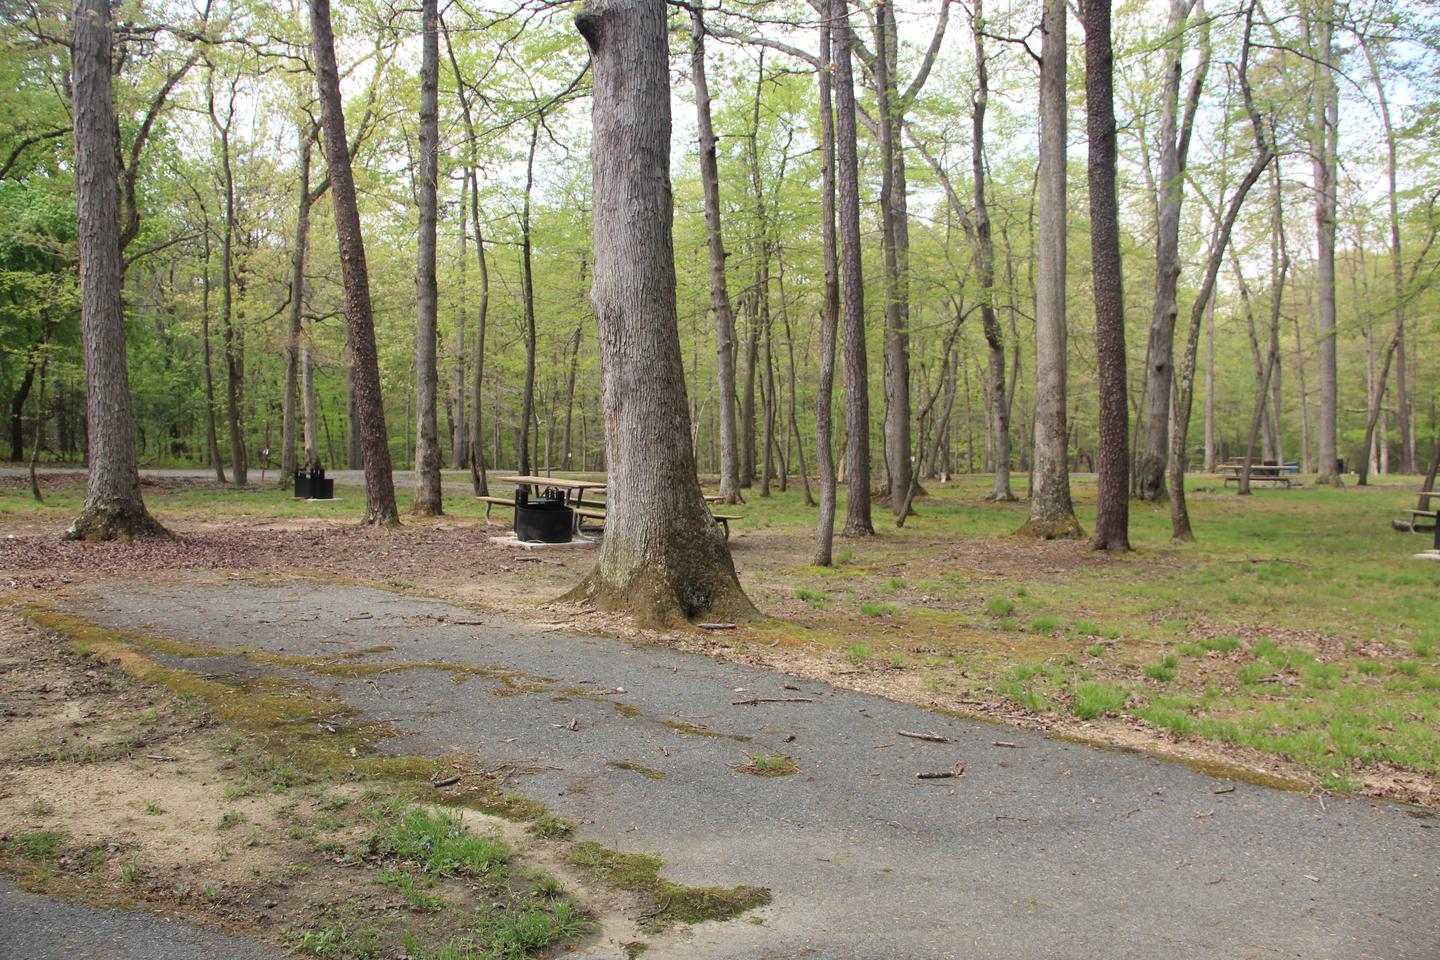 C88 C Loop of the Greenbelt Park Maryland campground